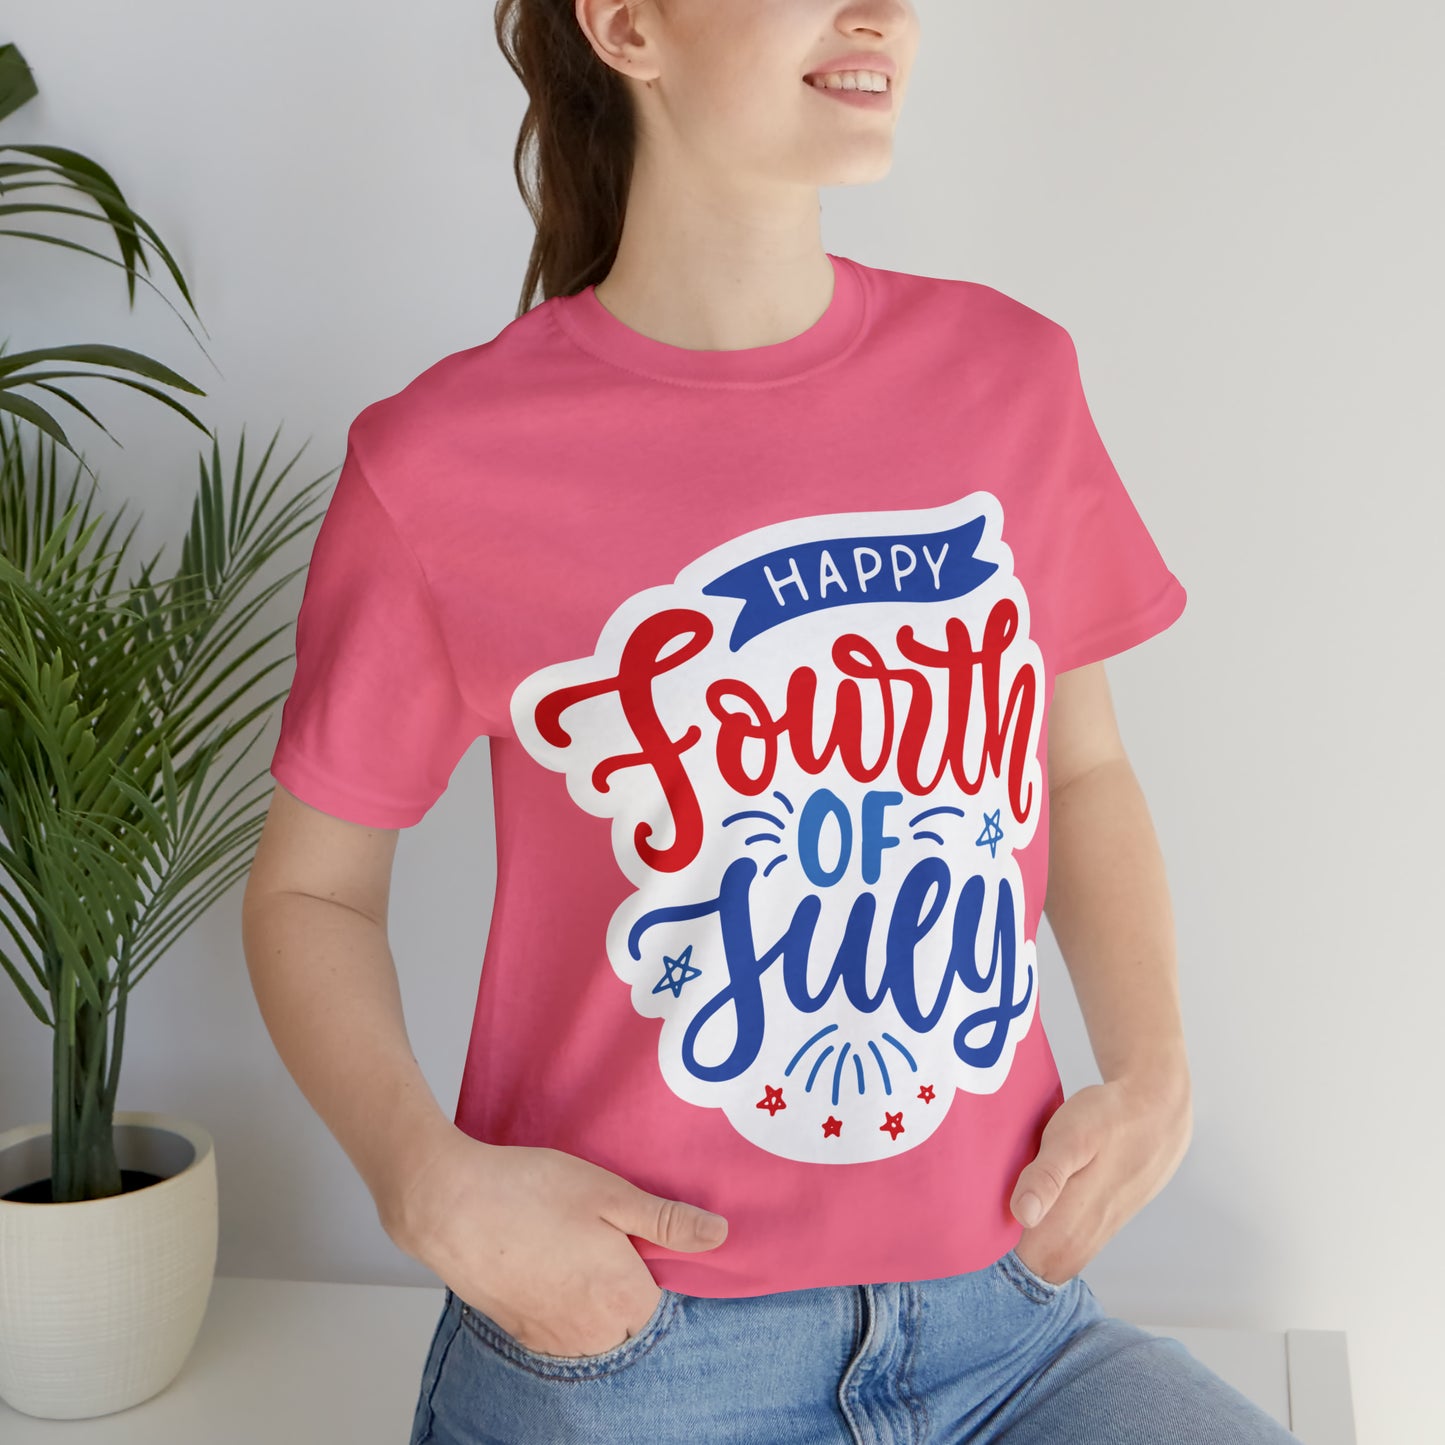 Charity Pink T-Shirt Tshirt Design Gift for Friend and Family Short Sleeved Shirt July 4th Independence Day Petrova Designs